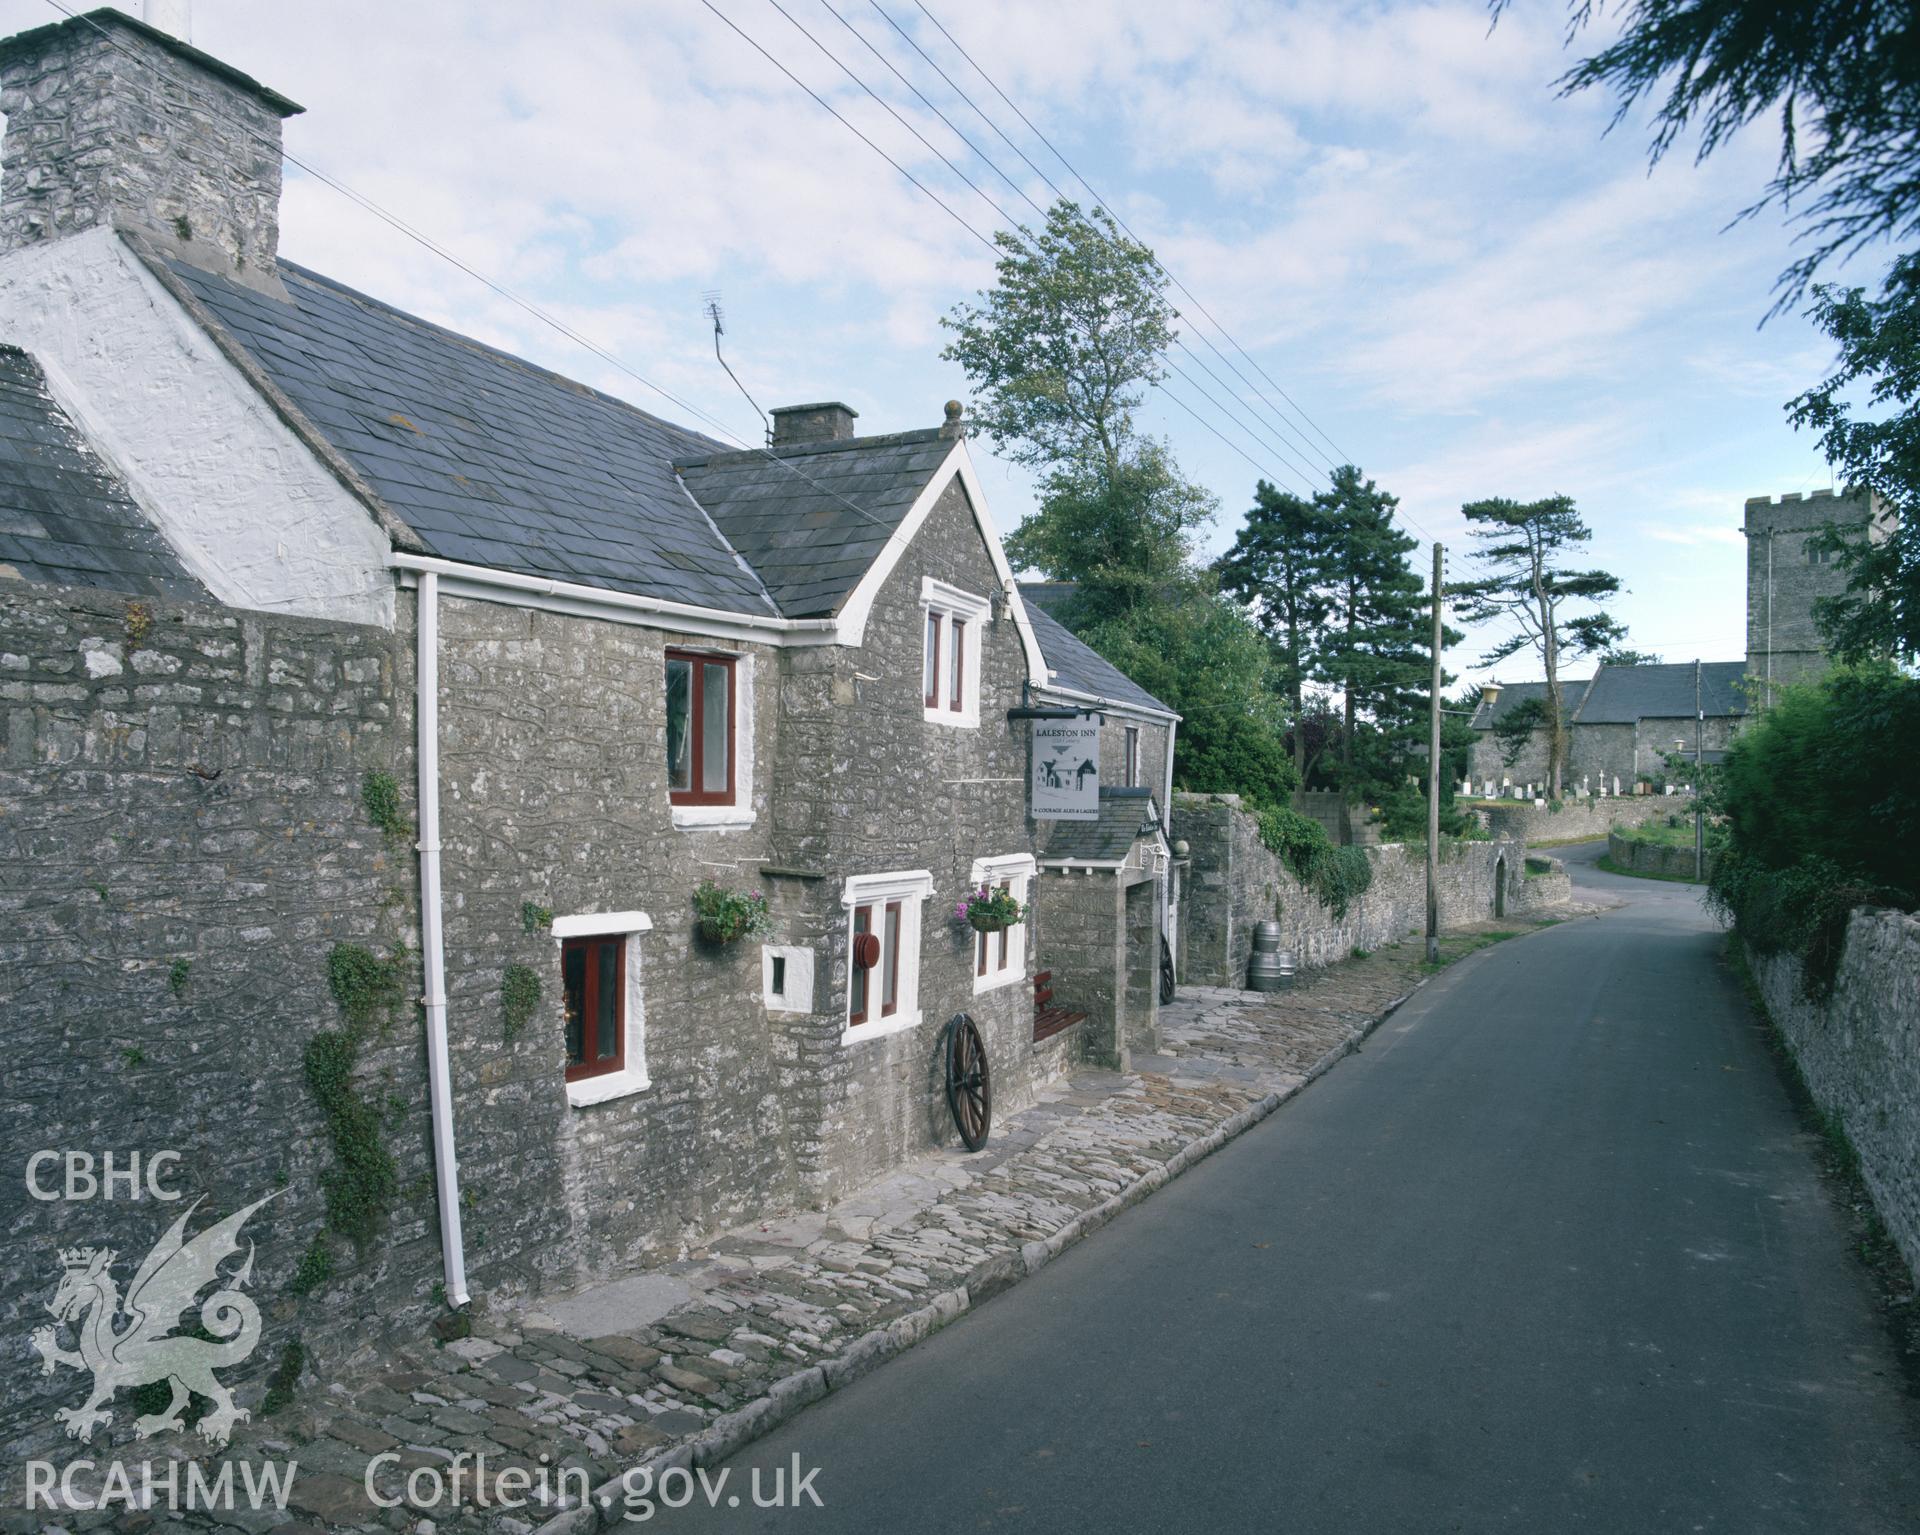 RCAHMW colour transparency showing view of Laleston, Glamorgan